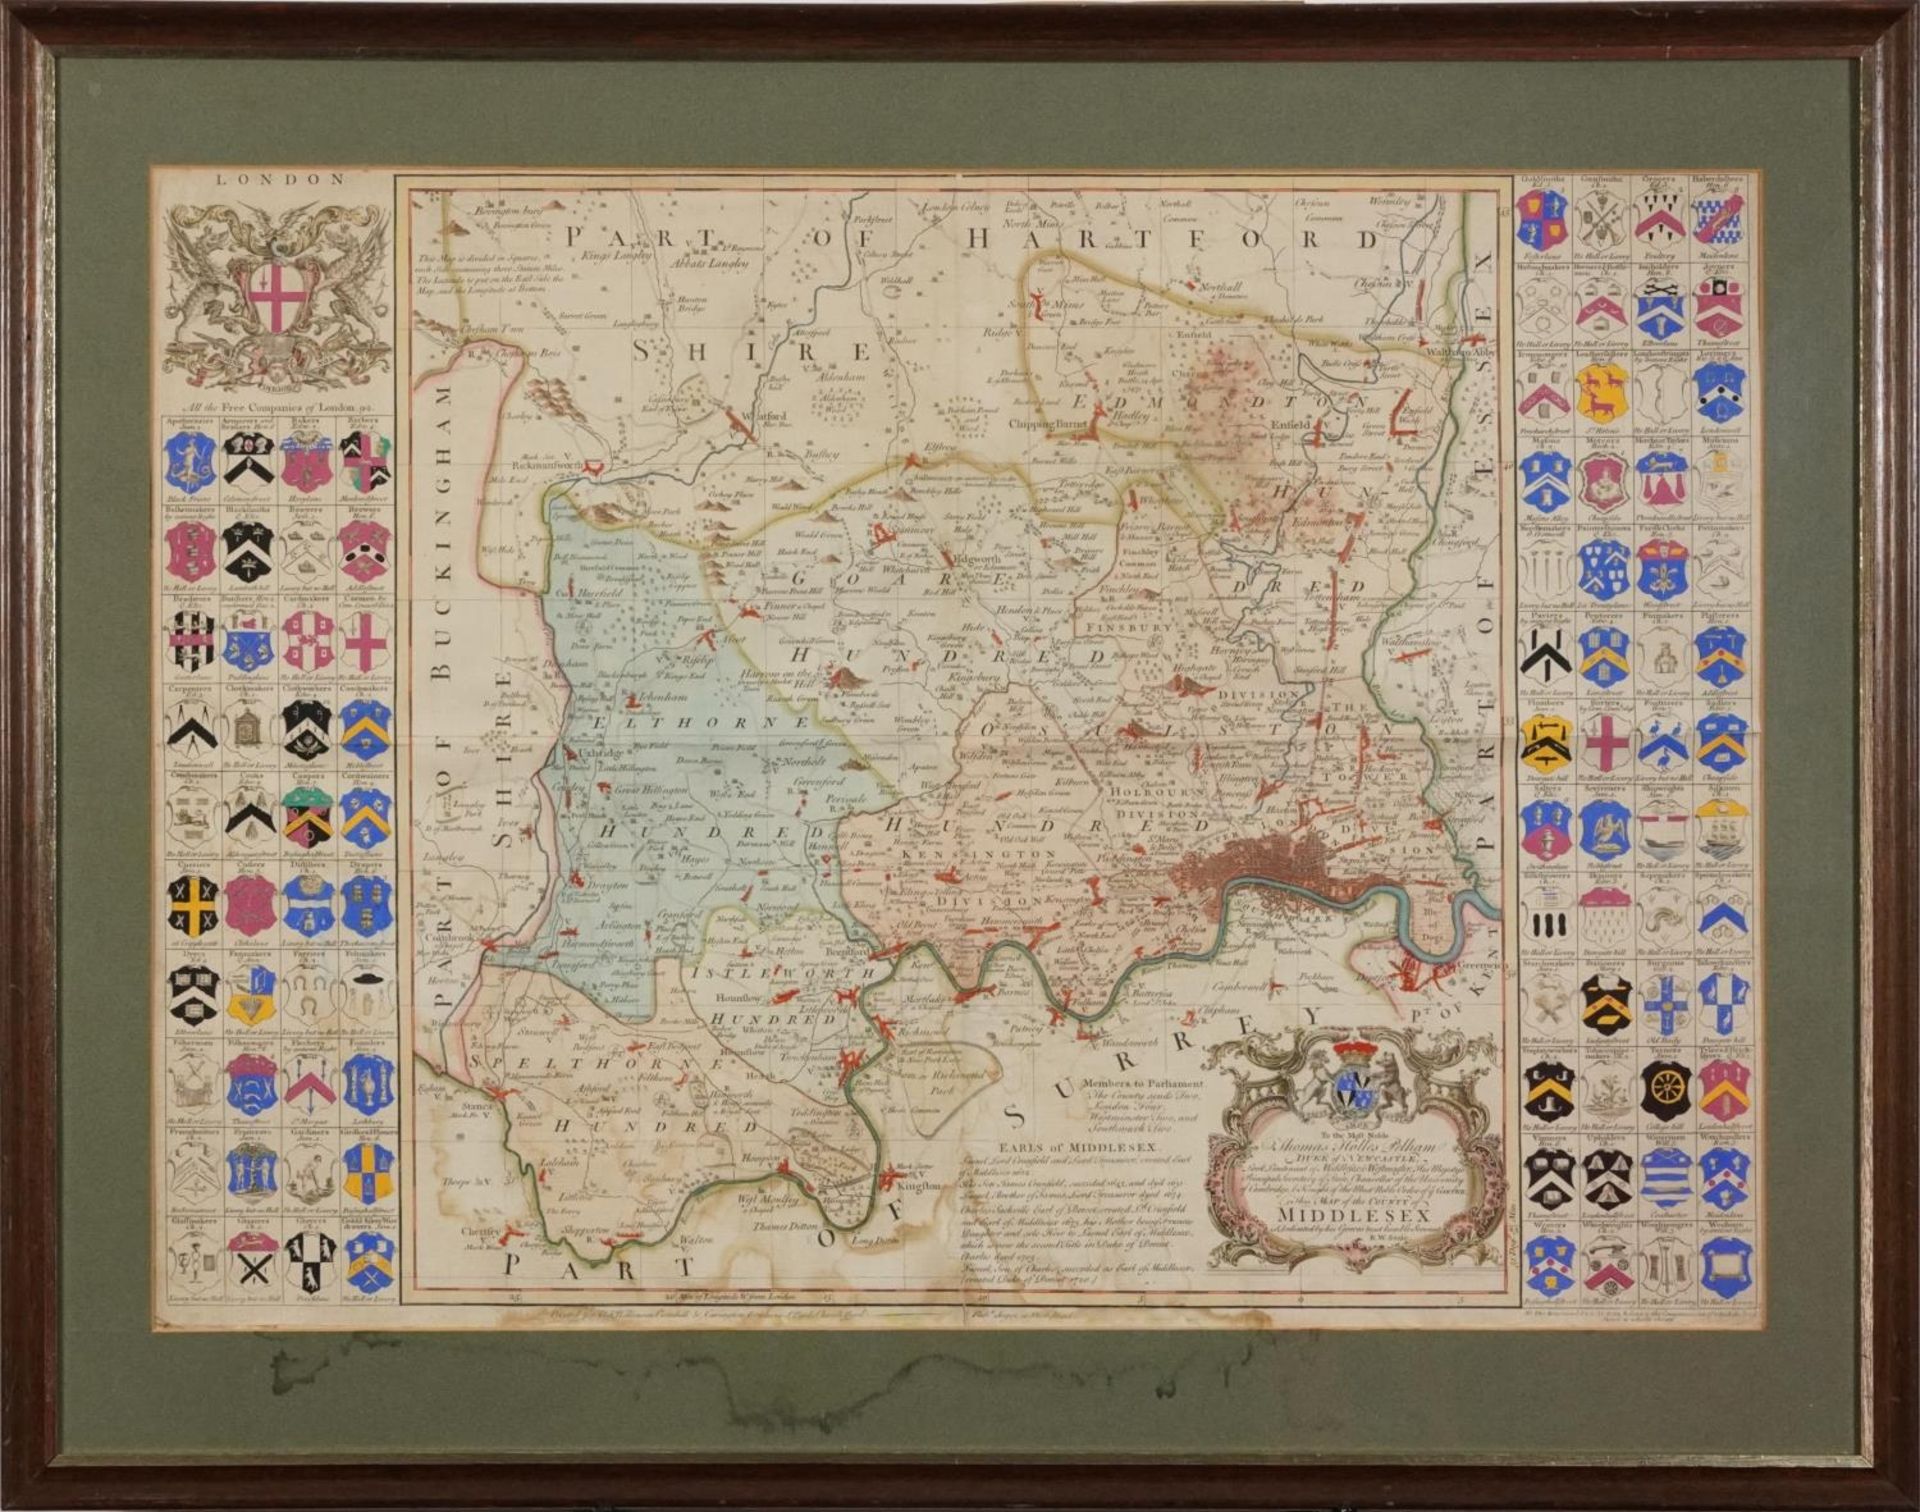 Antique hand coloured map of Middlesex by Thomas Holles Pelham, Duke of Newcastle, printed for - Image 2 of 6